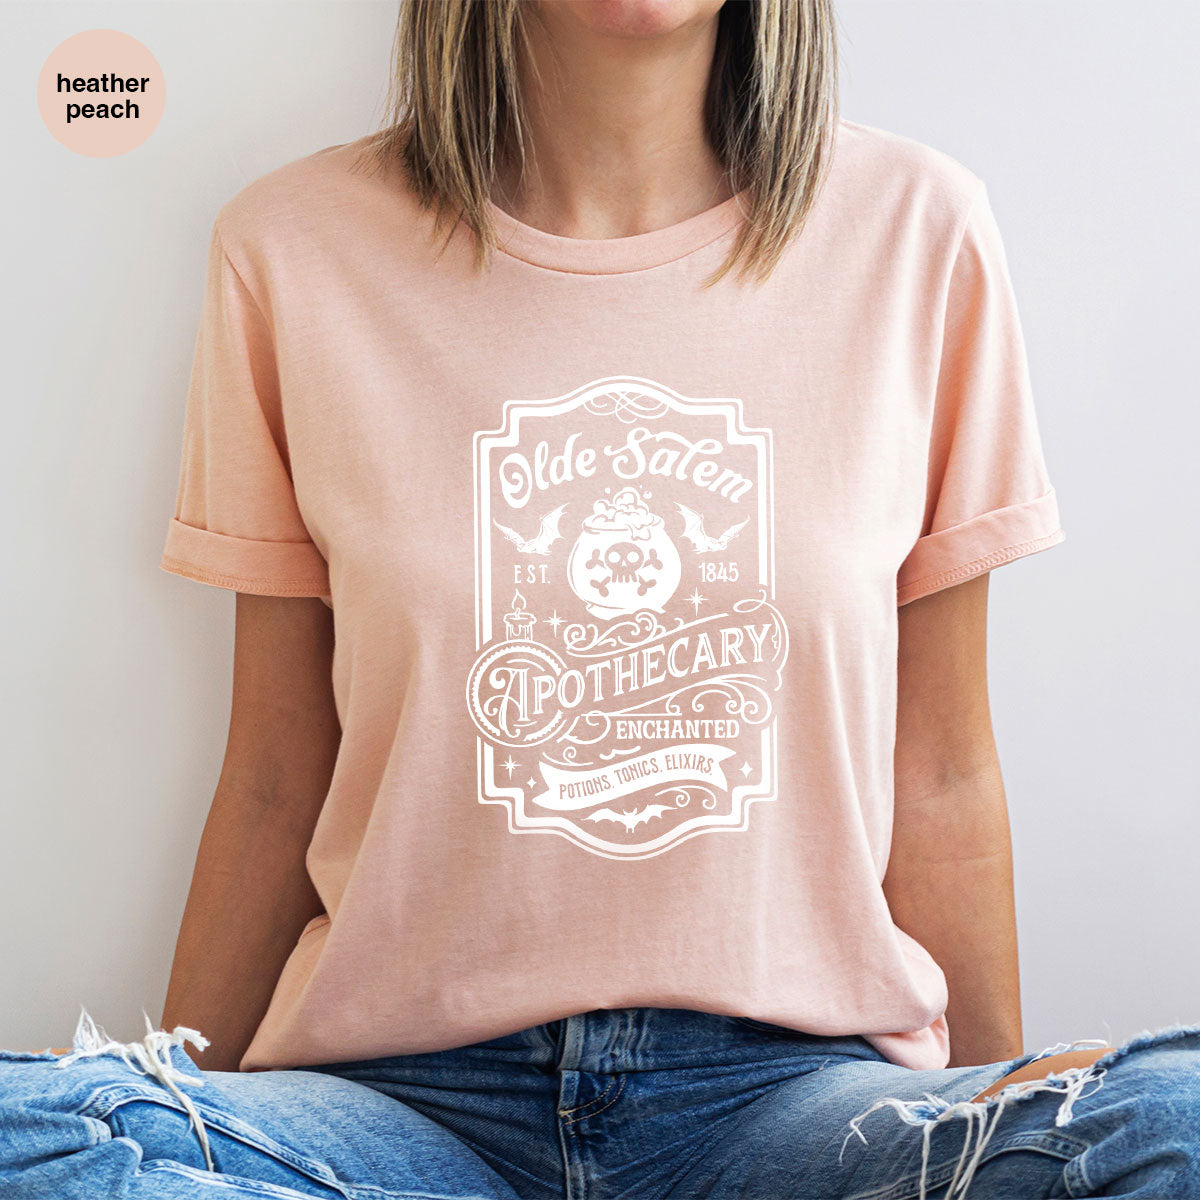 Spooky Season Clothing, Witches Crewneck Sweatshirts, Halloween Gifts, Salem Graphic Tees, Girls Apothecary T-Shirt, Womens Vneck Tshirt